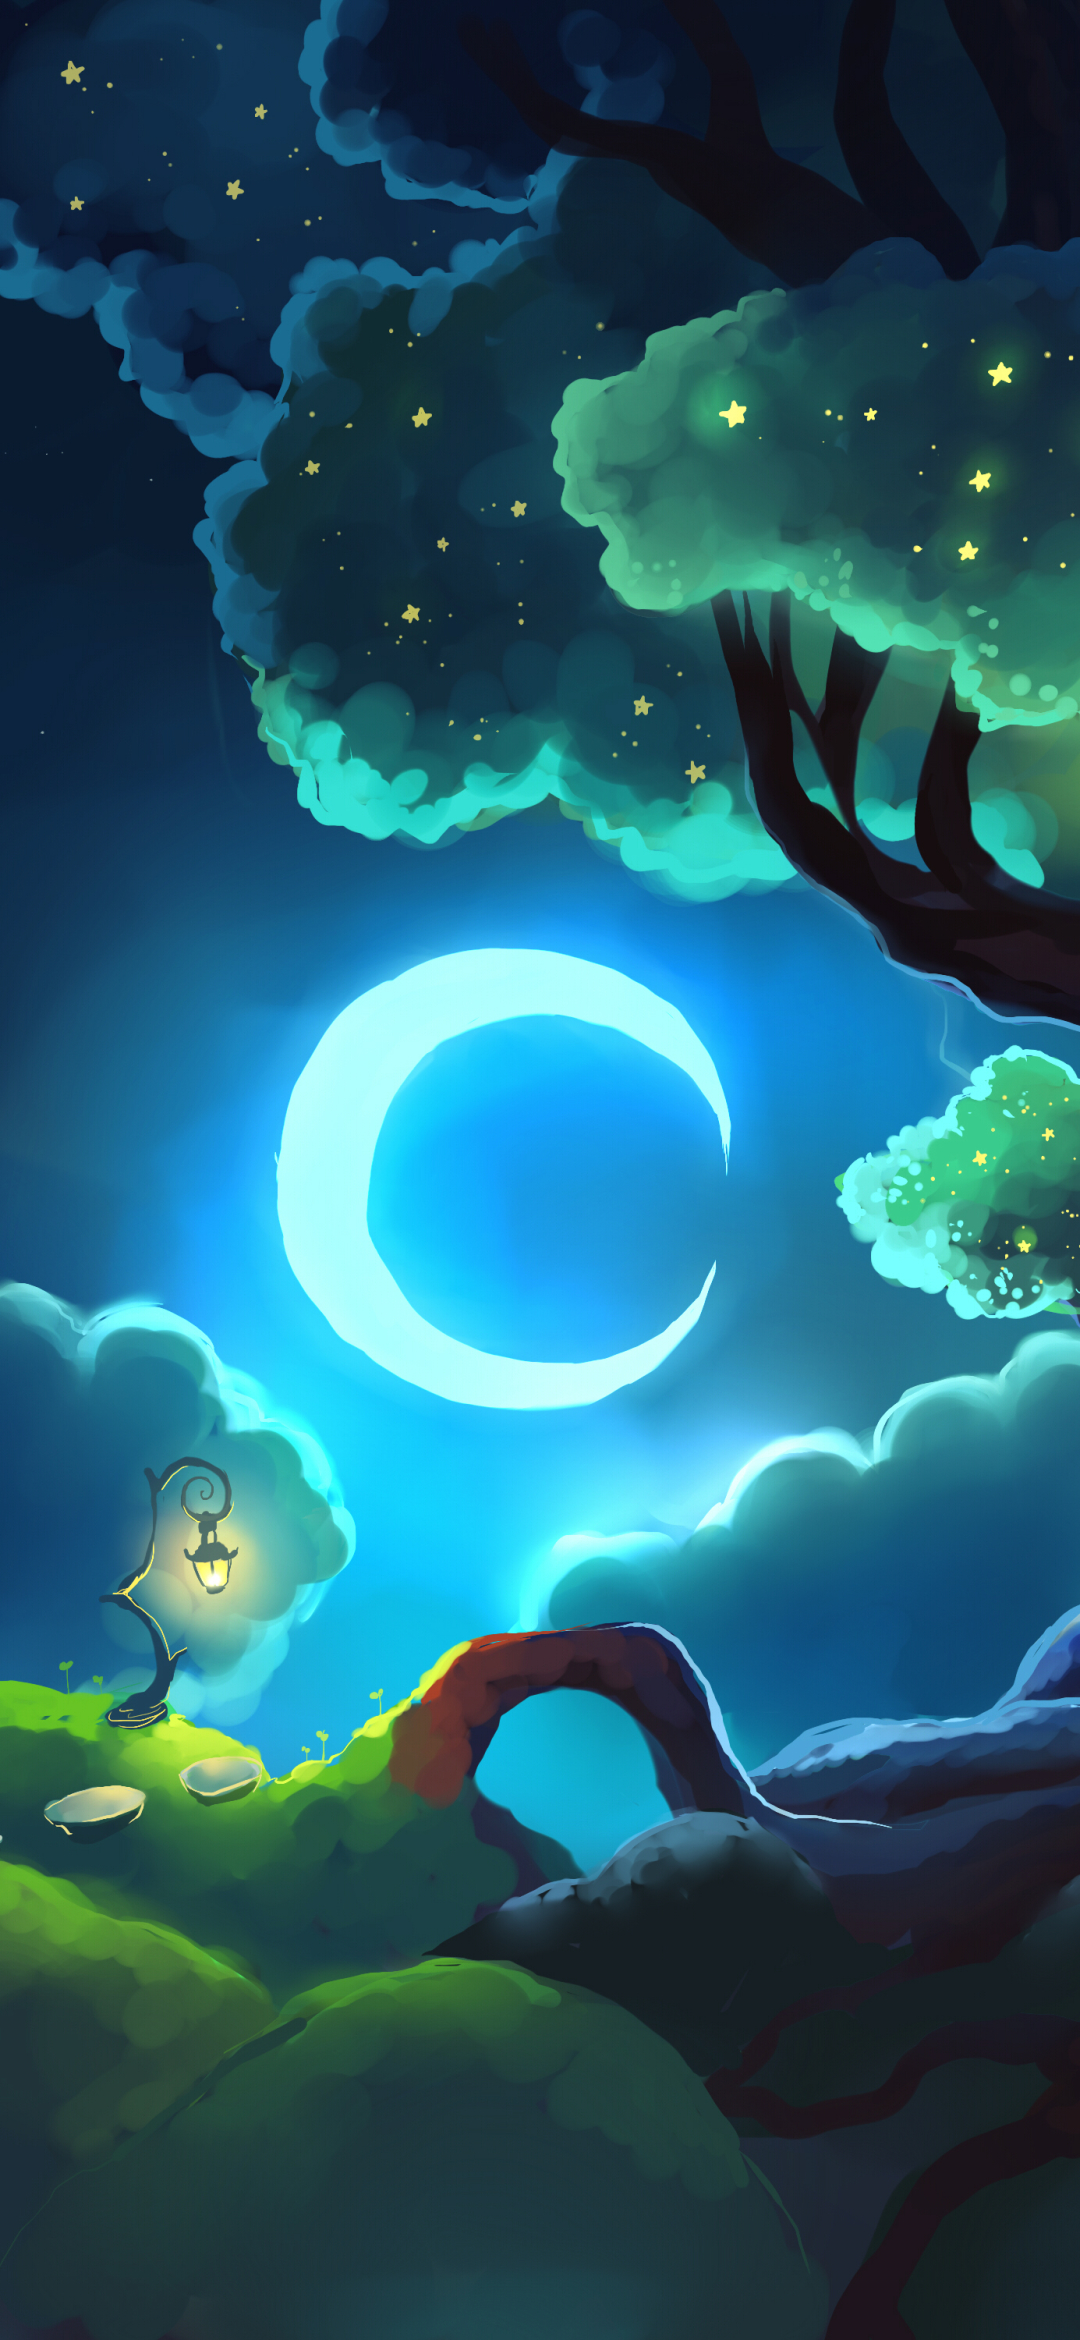 roots, moon, artistic, tree, painting, crescent, cloud, stars